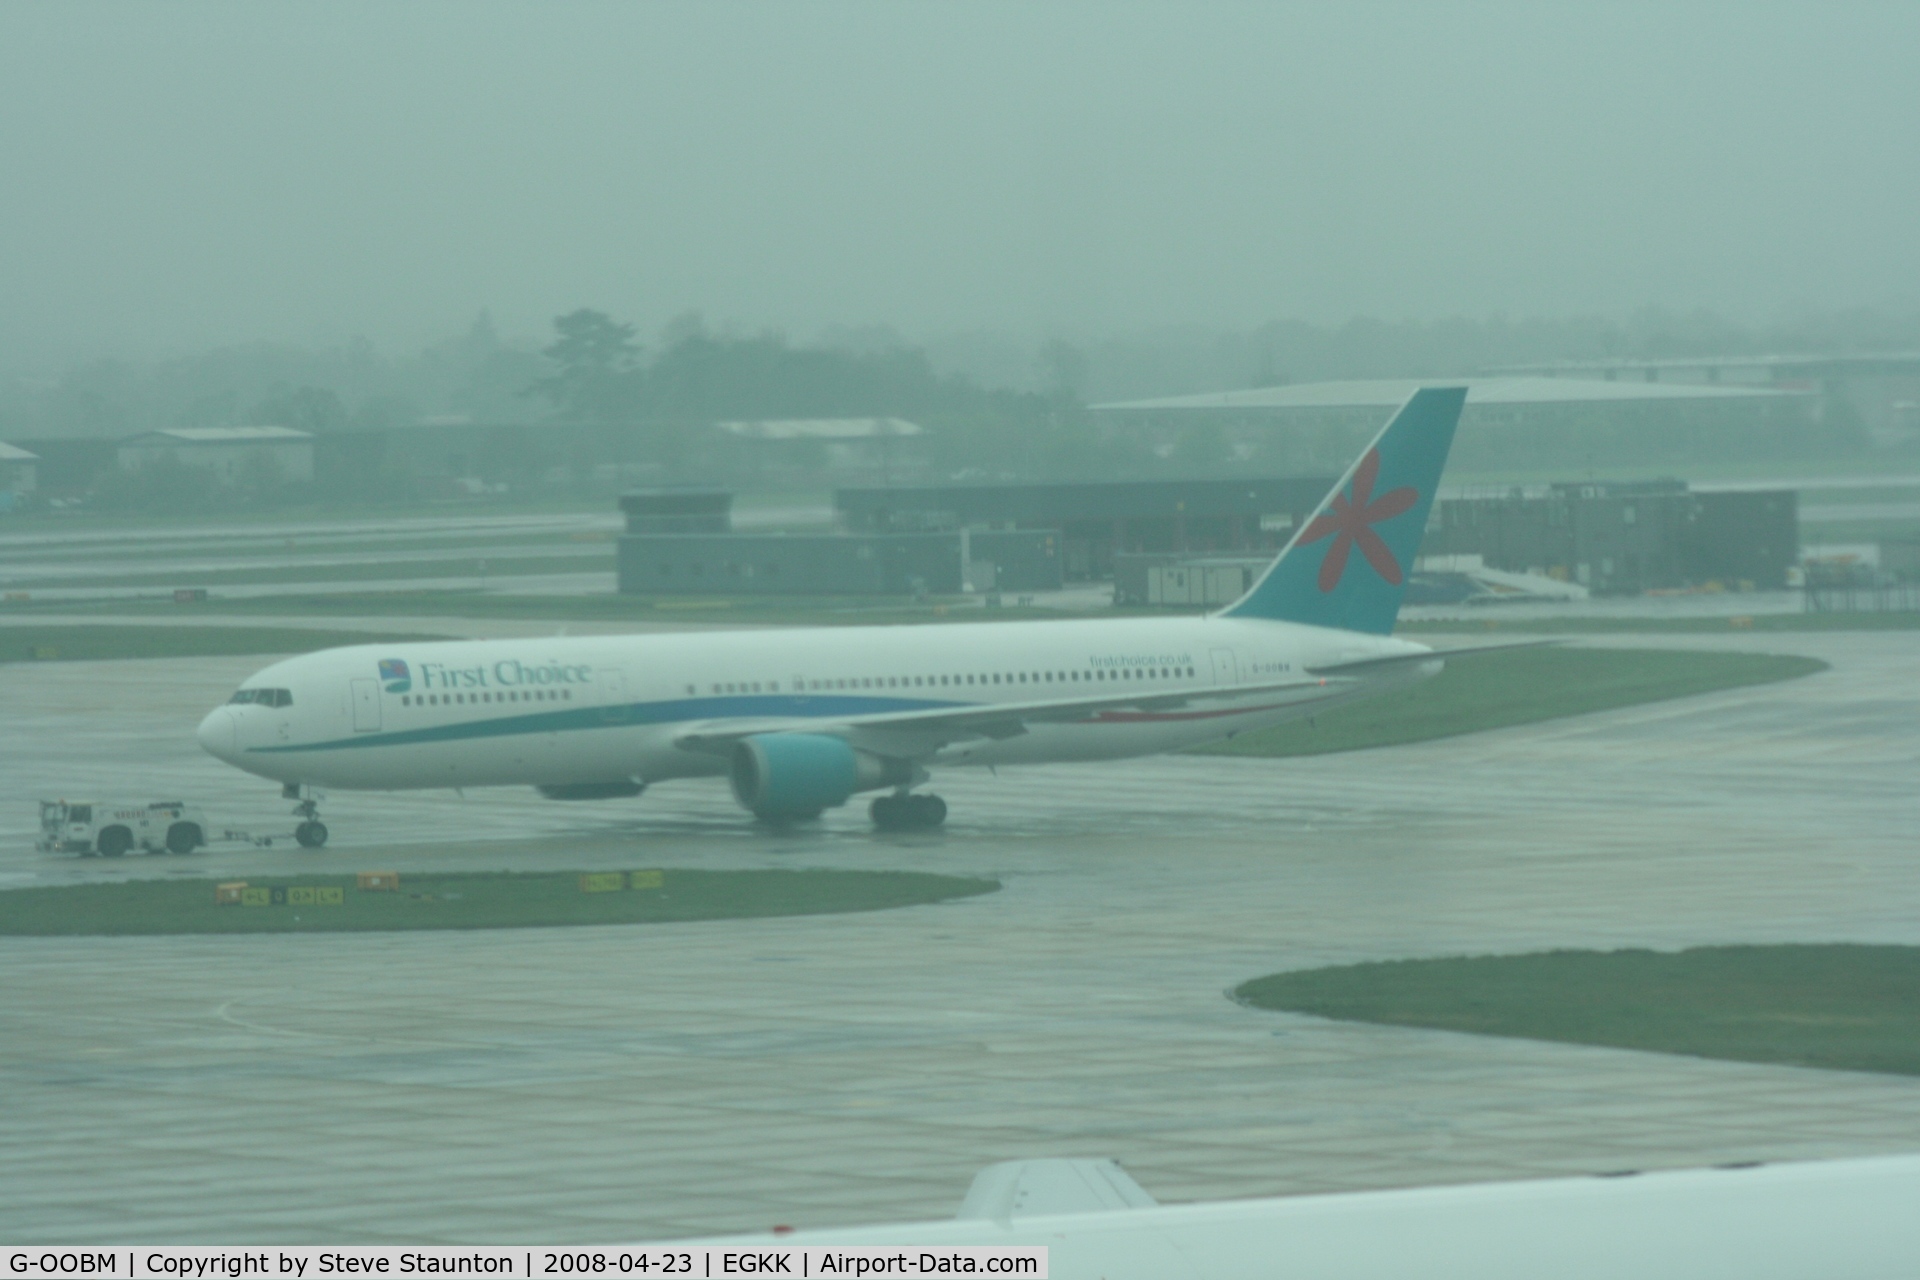 G-OOBM, 1995 Boeing 767-324 C/N 27568, Taken on a gloomy wet morning at Gatwick Airport